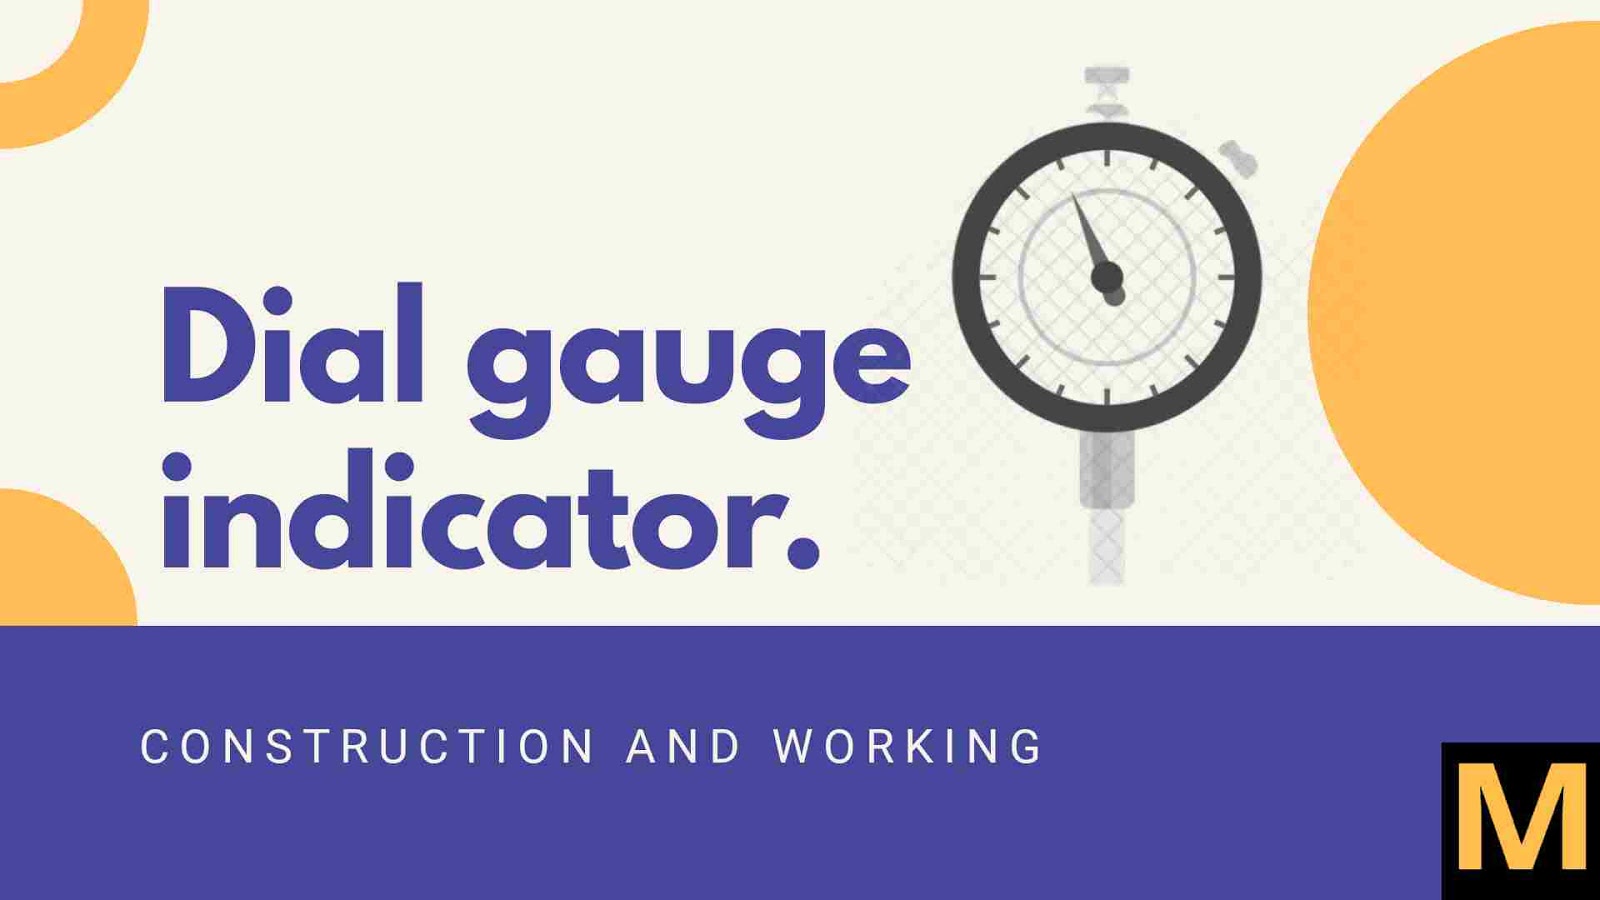 Dial gauge indicator - construction and working | The Mechanical post